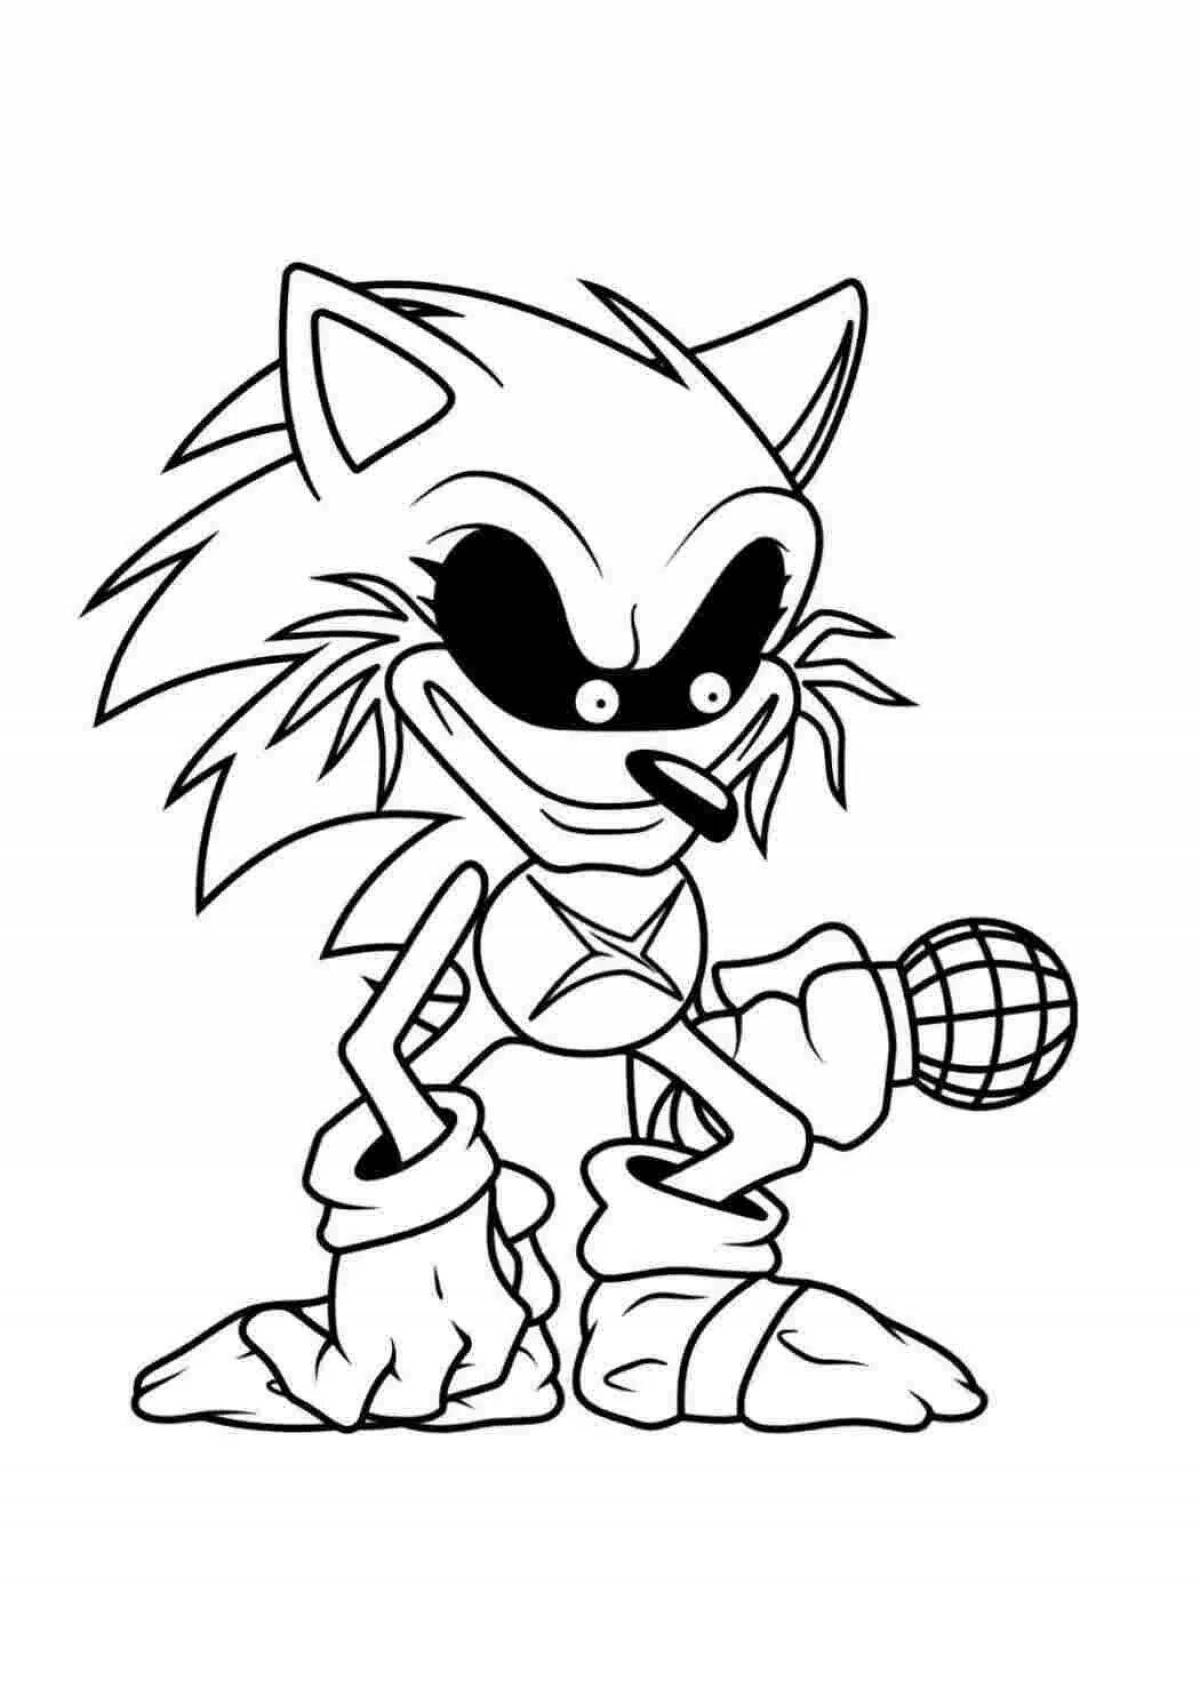 Charming sonic.exe coloring book